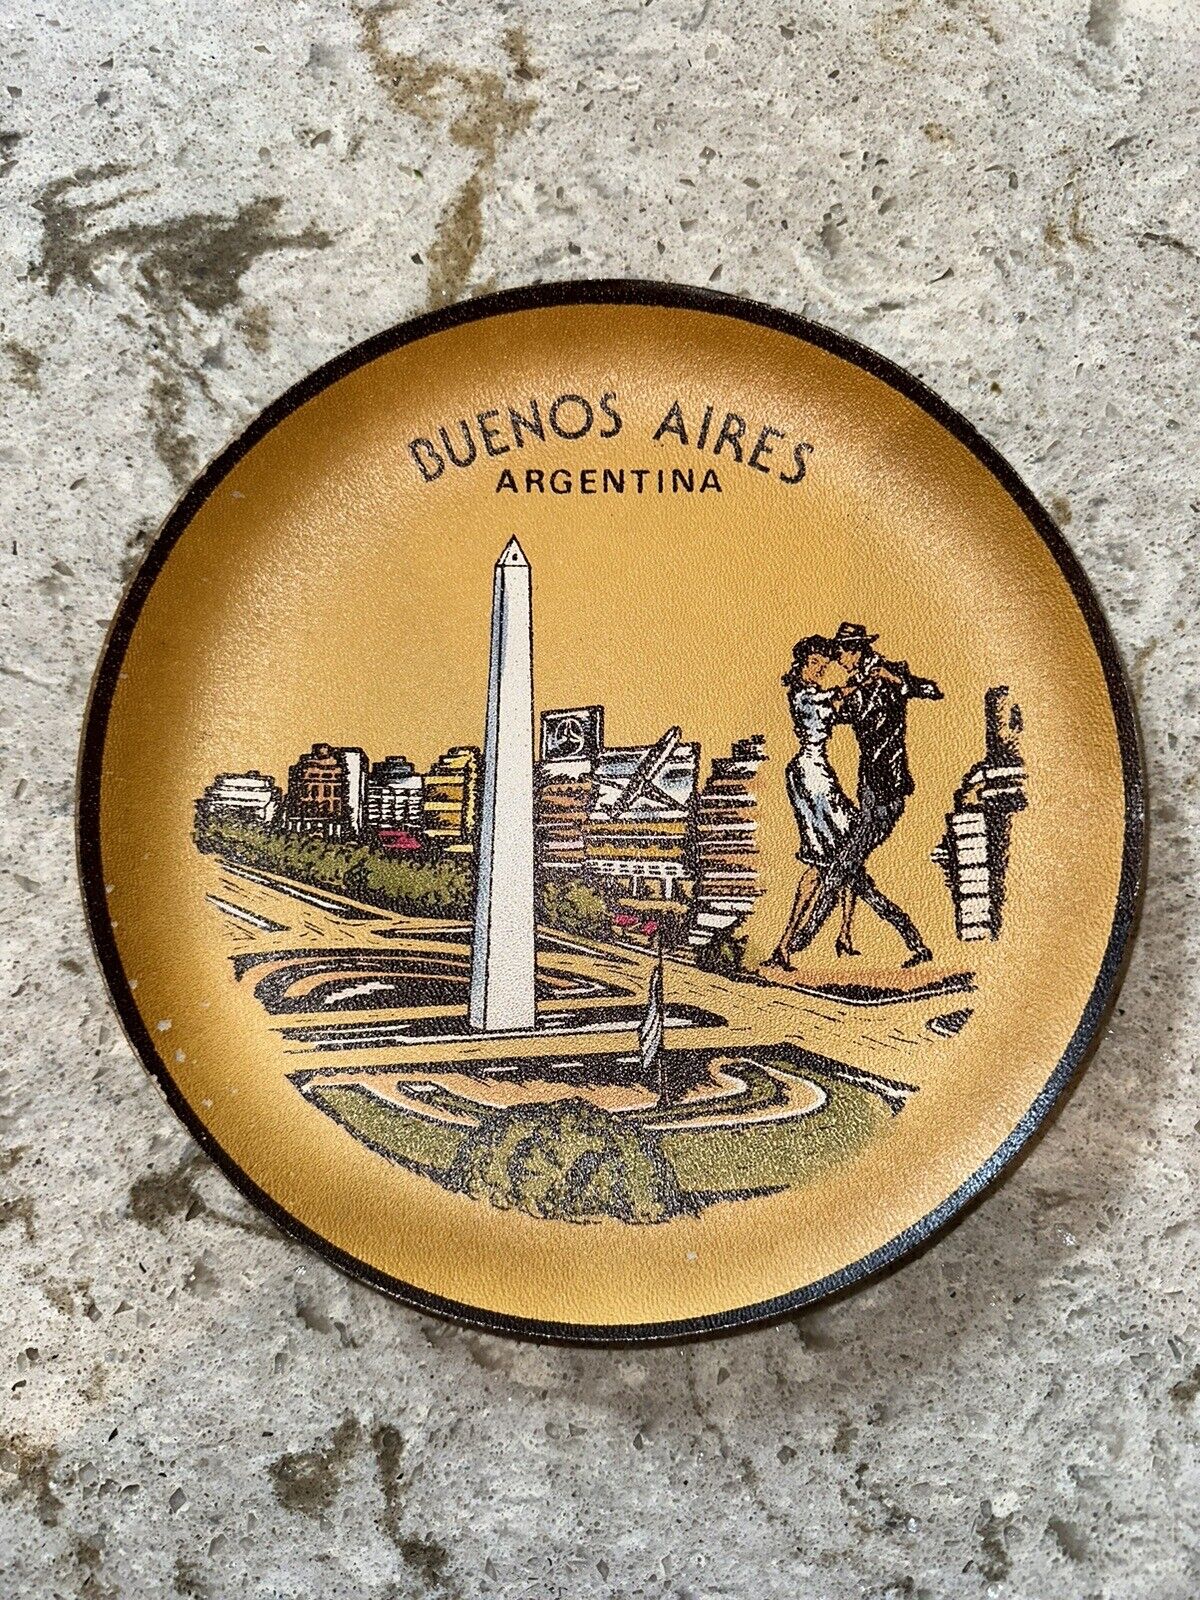 Vintage Buenos Aires Argentina Leather Decorative Wall Plate Great Condition 8”